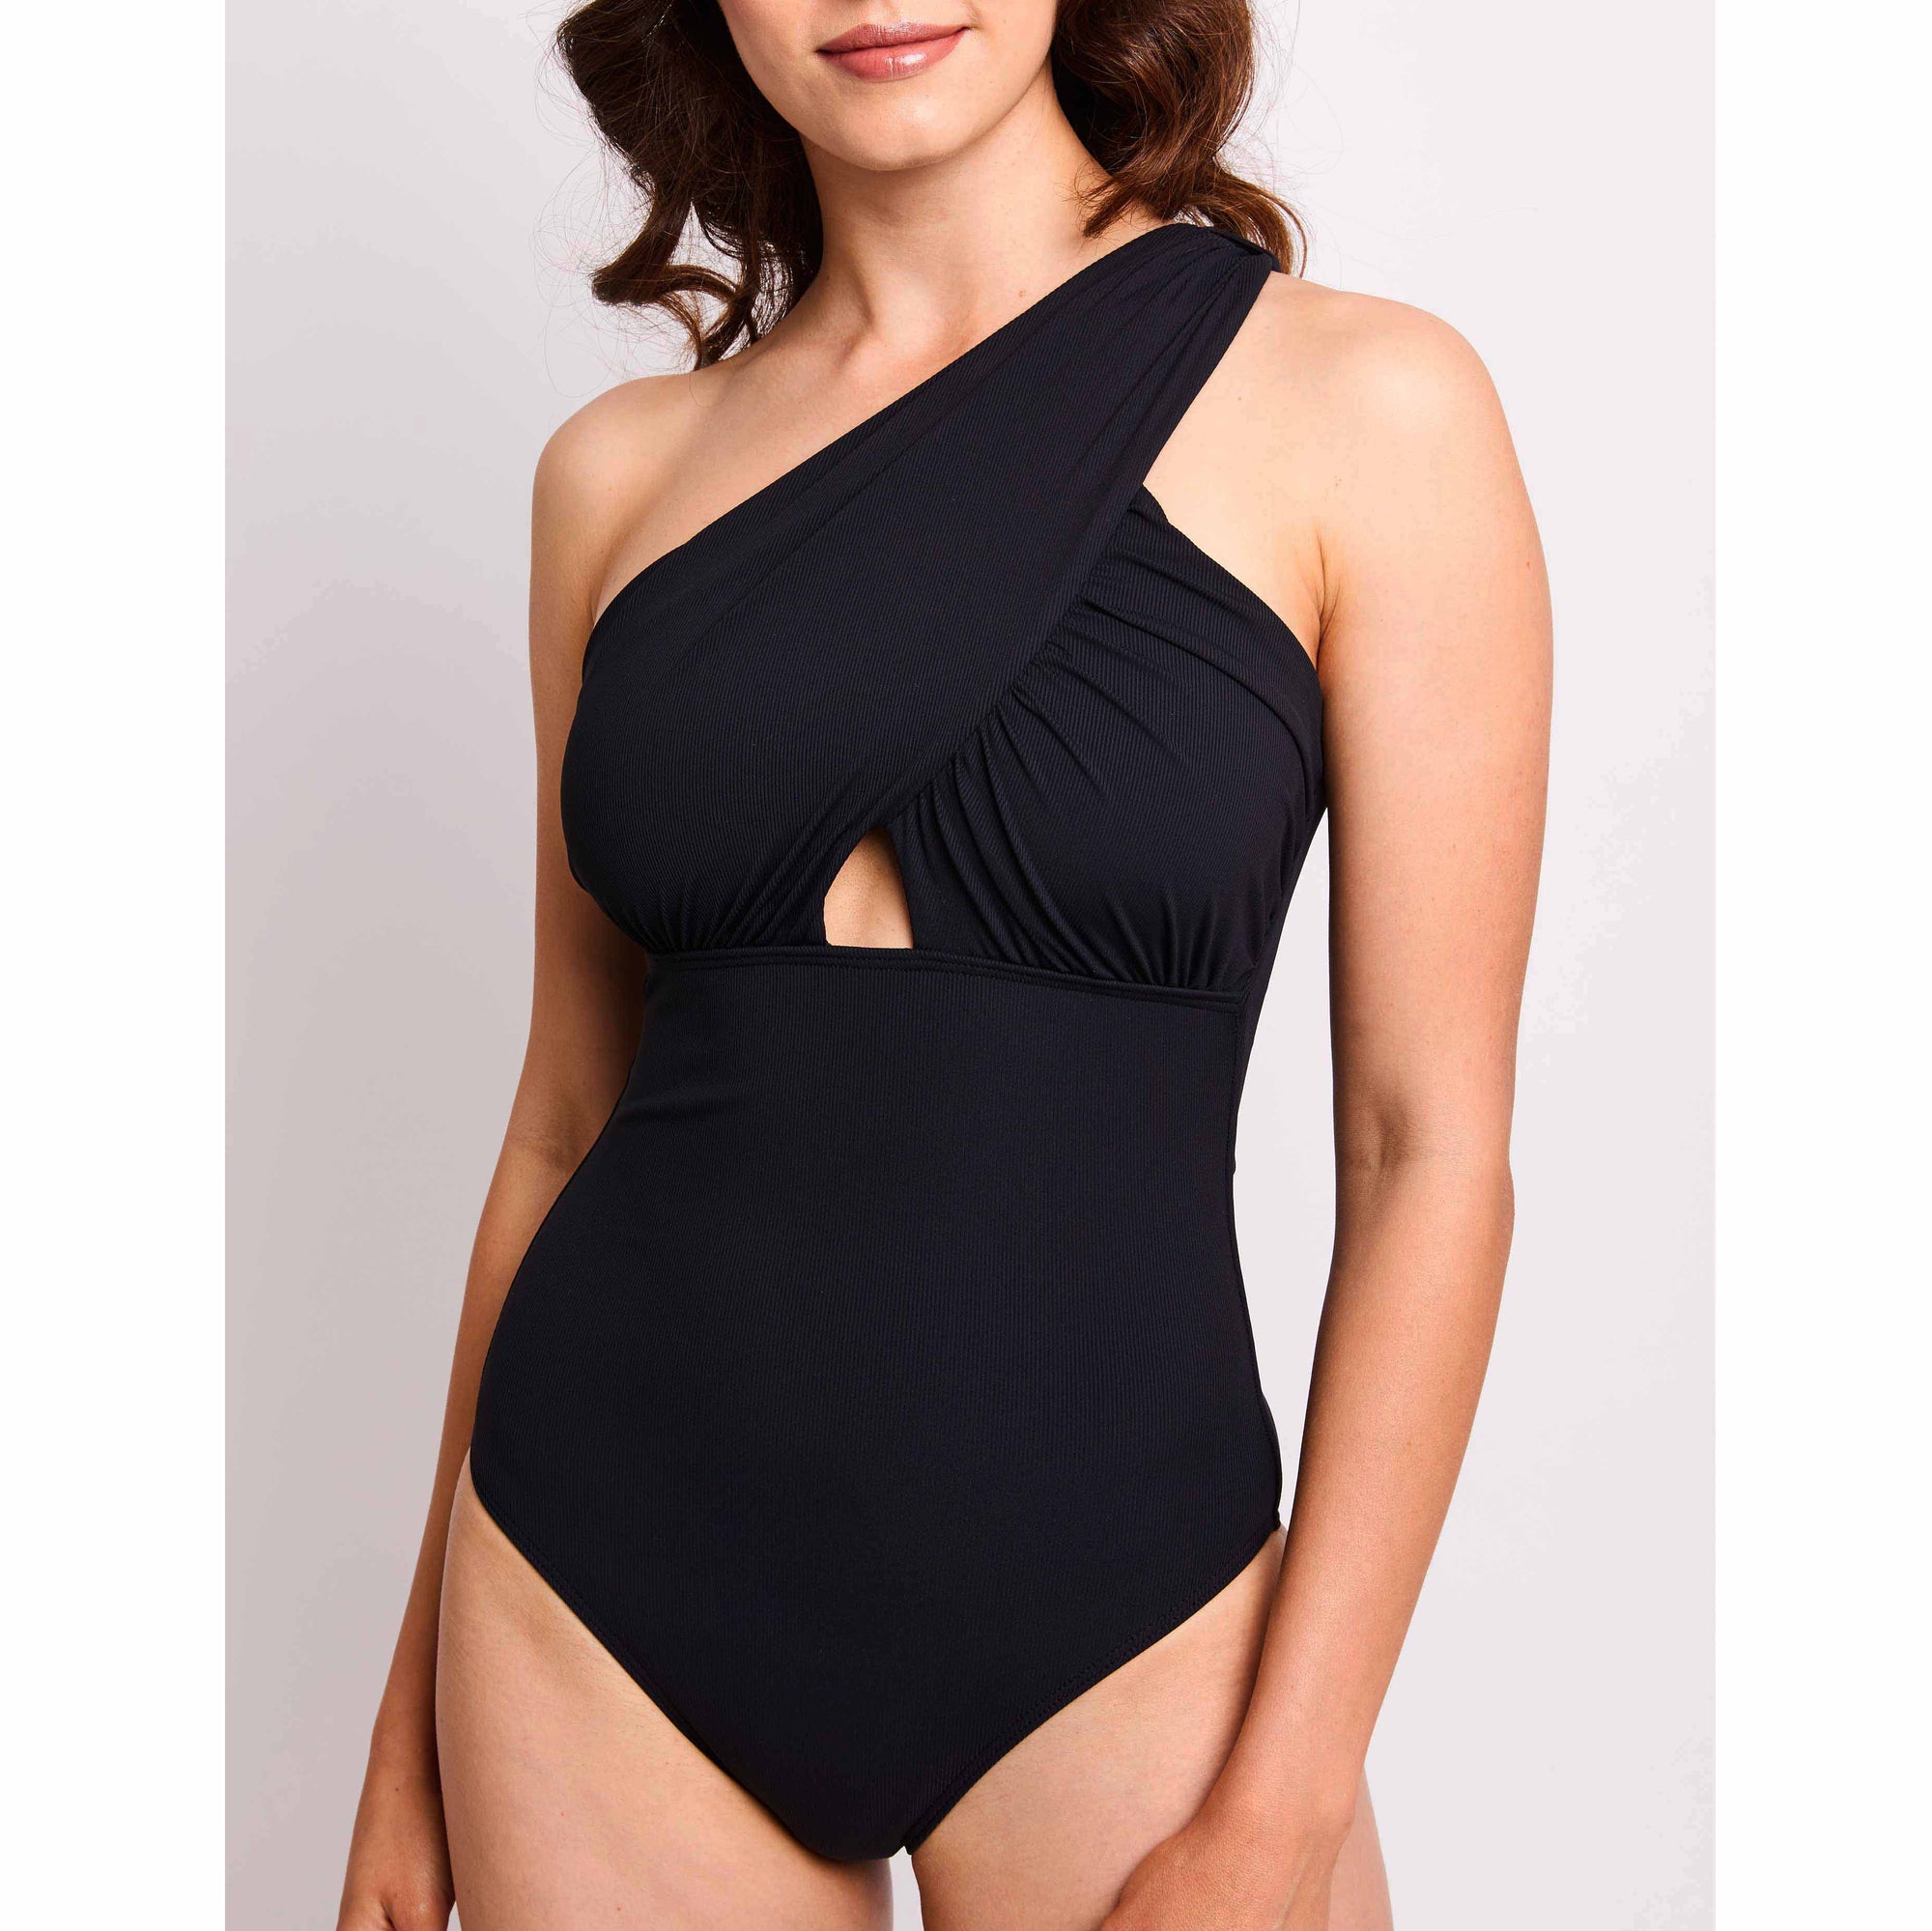 Angelica-one-piece-ribbed-black-2-contessa-volpi-summer-swimwear-collection